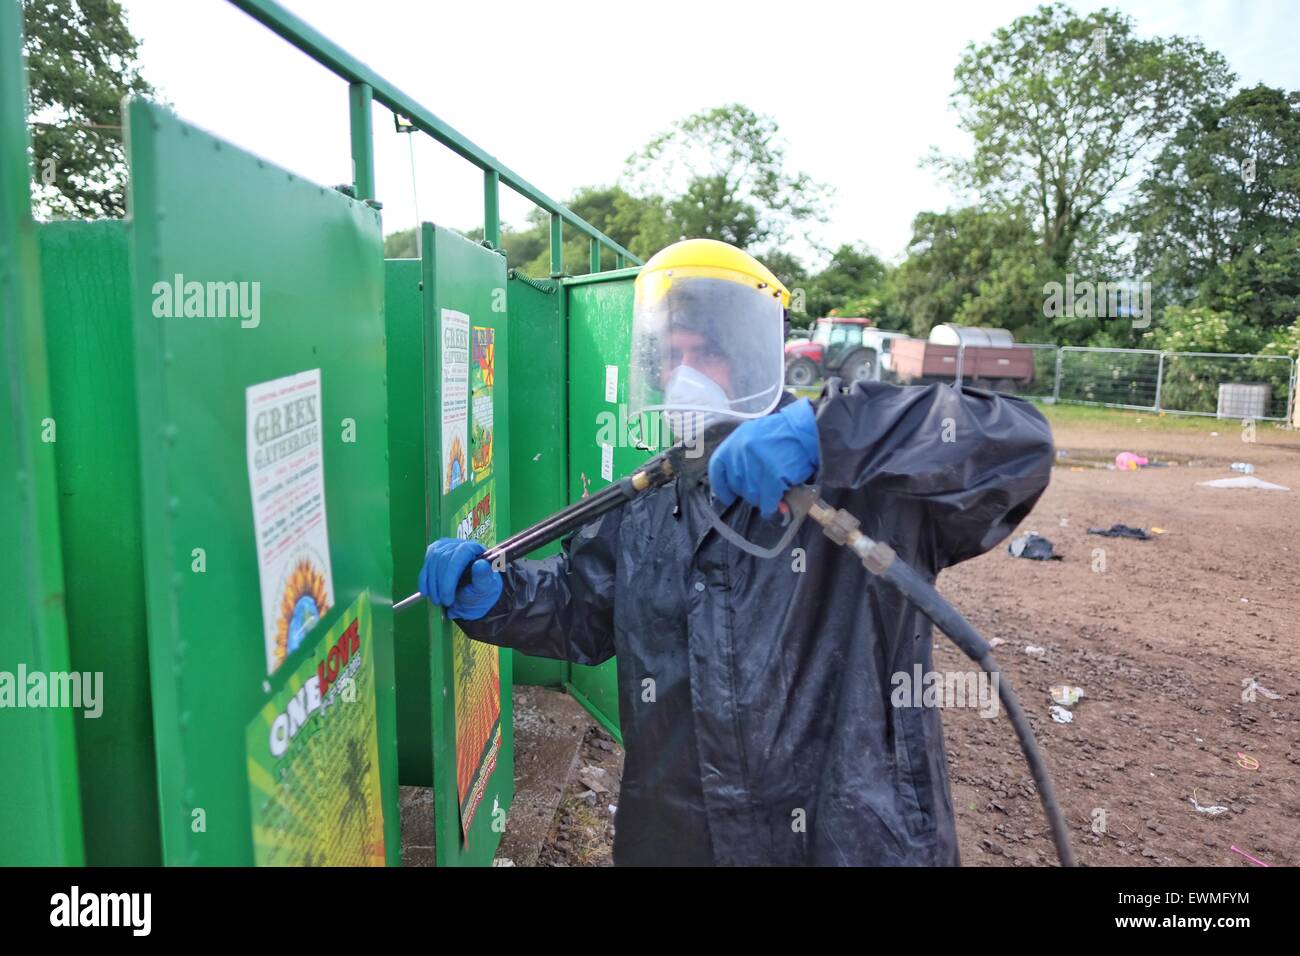 Glastonbury Festival, Somerset, UK. 29 June 2015. As the exodus from the festival site gets underway the clean up begins in earnest and the notorious long drop toilets get the pressure washer treatment. Credit:  Tom Corban/Alamy Live News Stock Photo